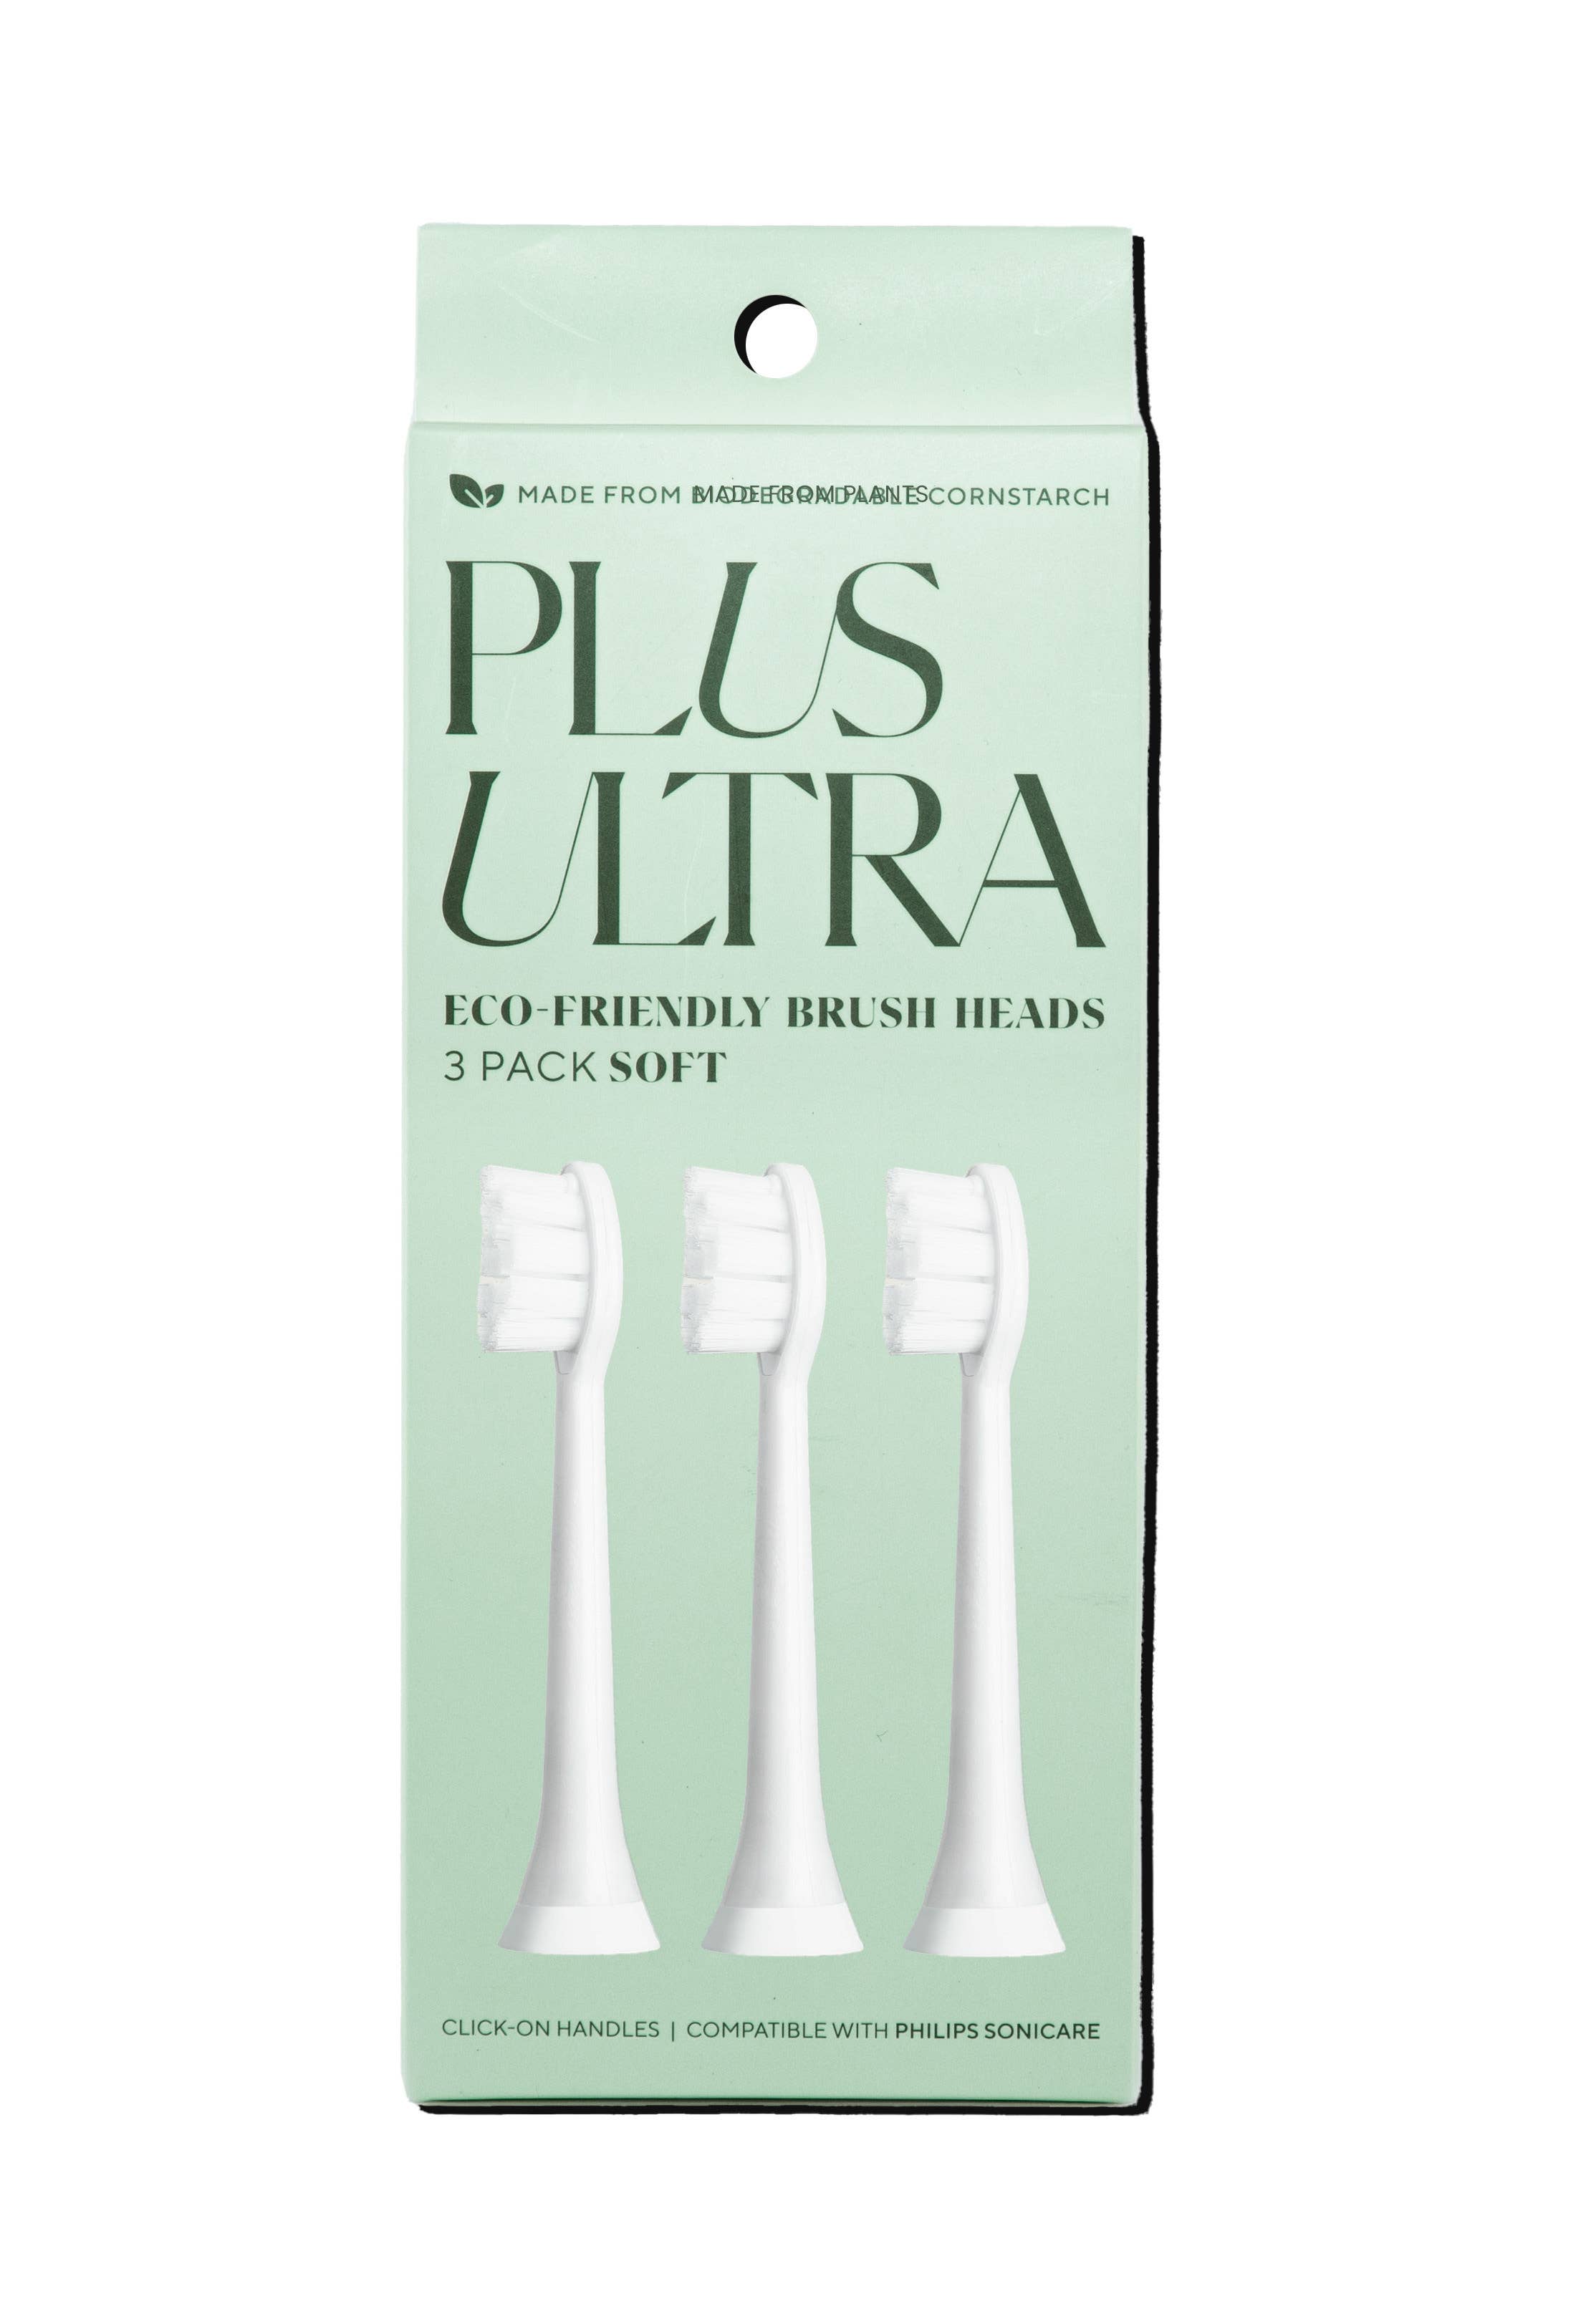 Biodegradable Electric Toothbrush Replacement Heads Sonicare